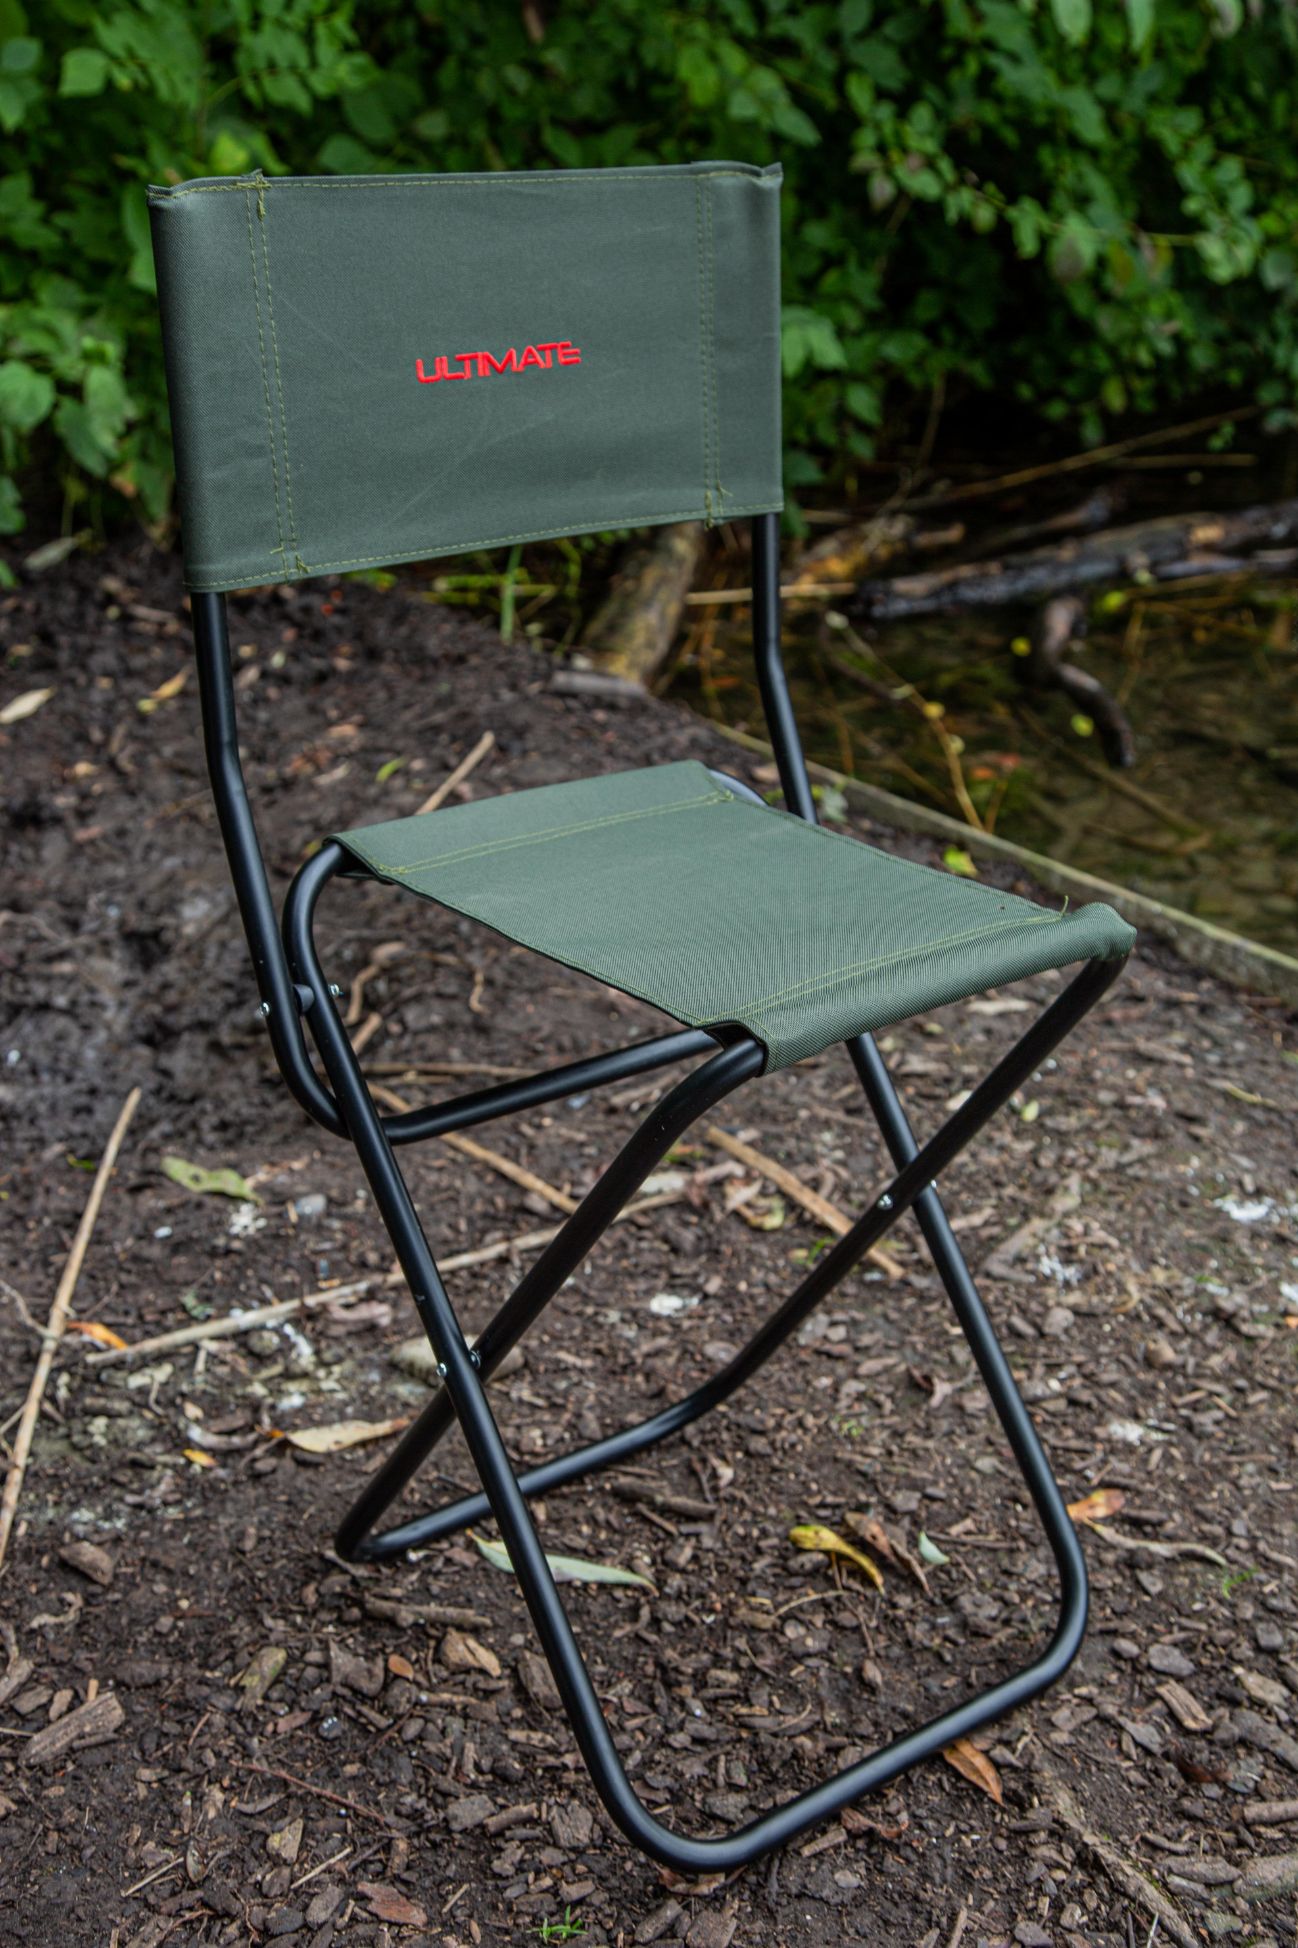 Ultimate Folding Seat Deluxe